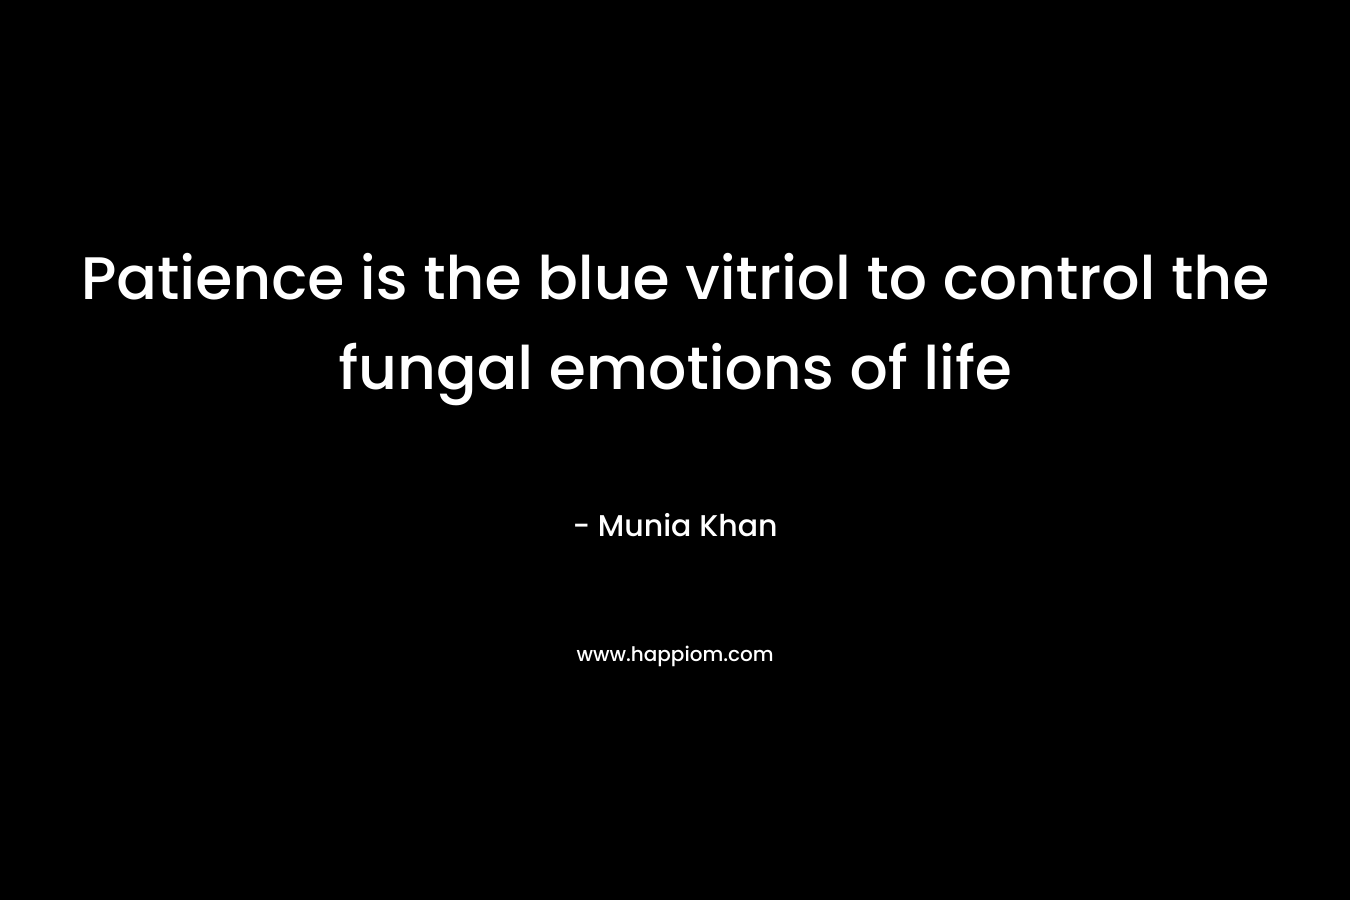 Patience is the blue vitriol to control the fungal emotions of life